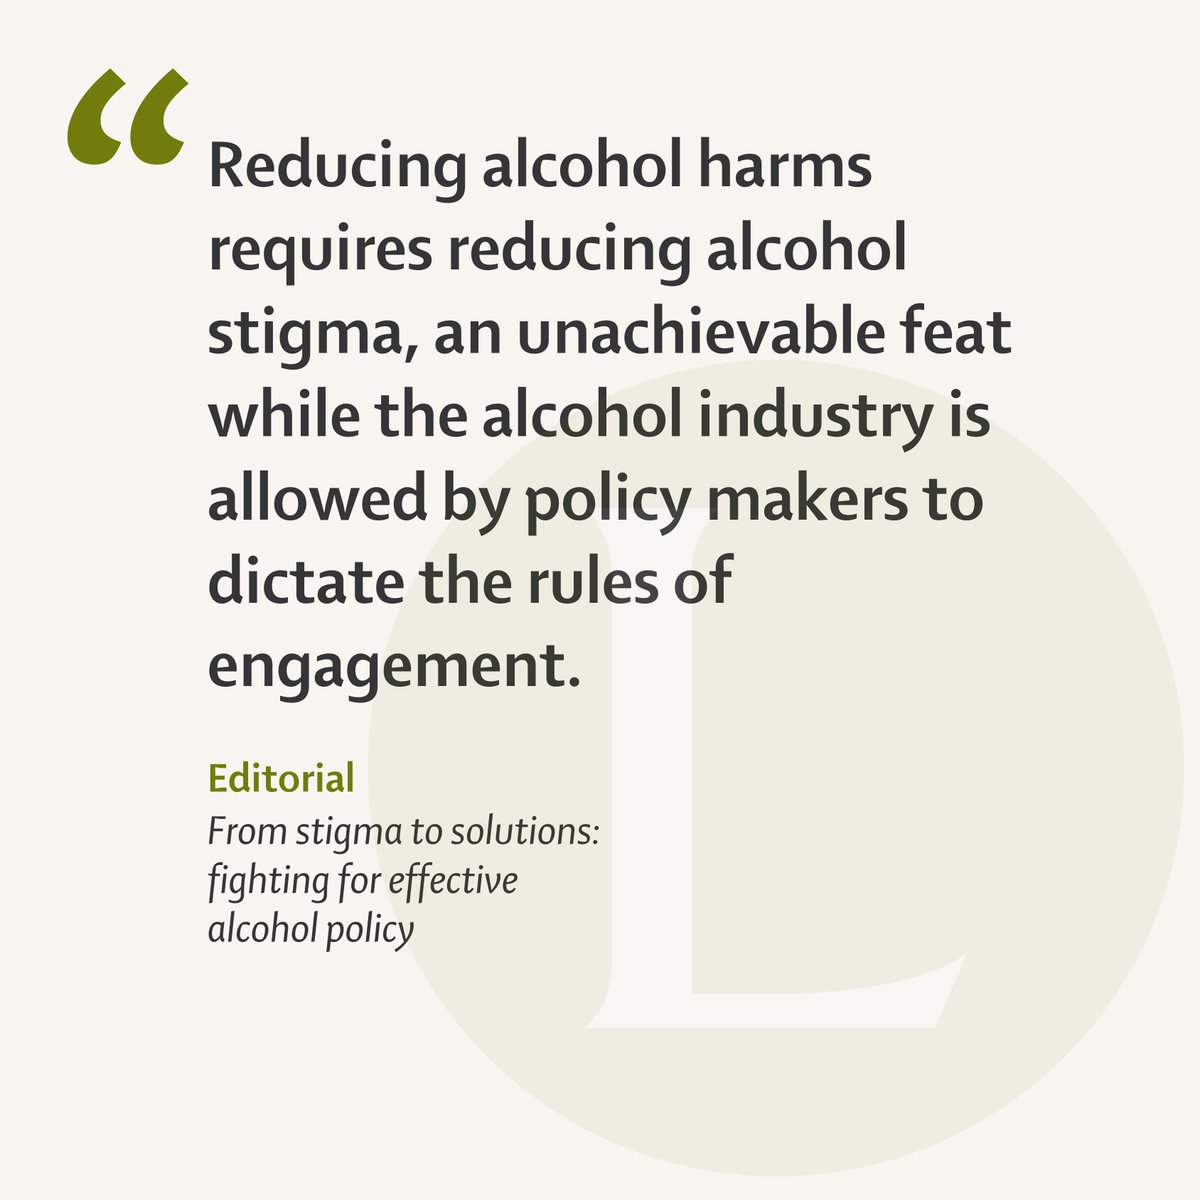 New Editorial - From stigma to solutions: fighting for effective alcohol policy thelancet.com/journals/langa… #Alcohol #LiverTwitter